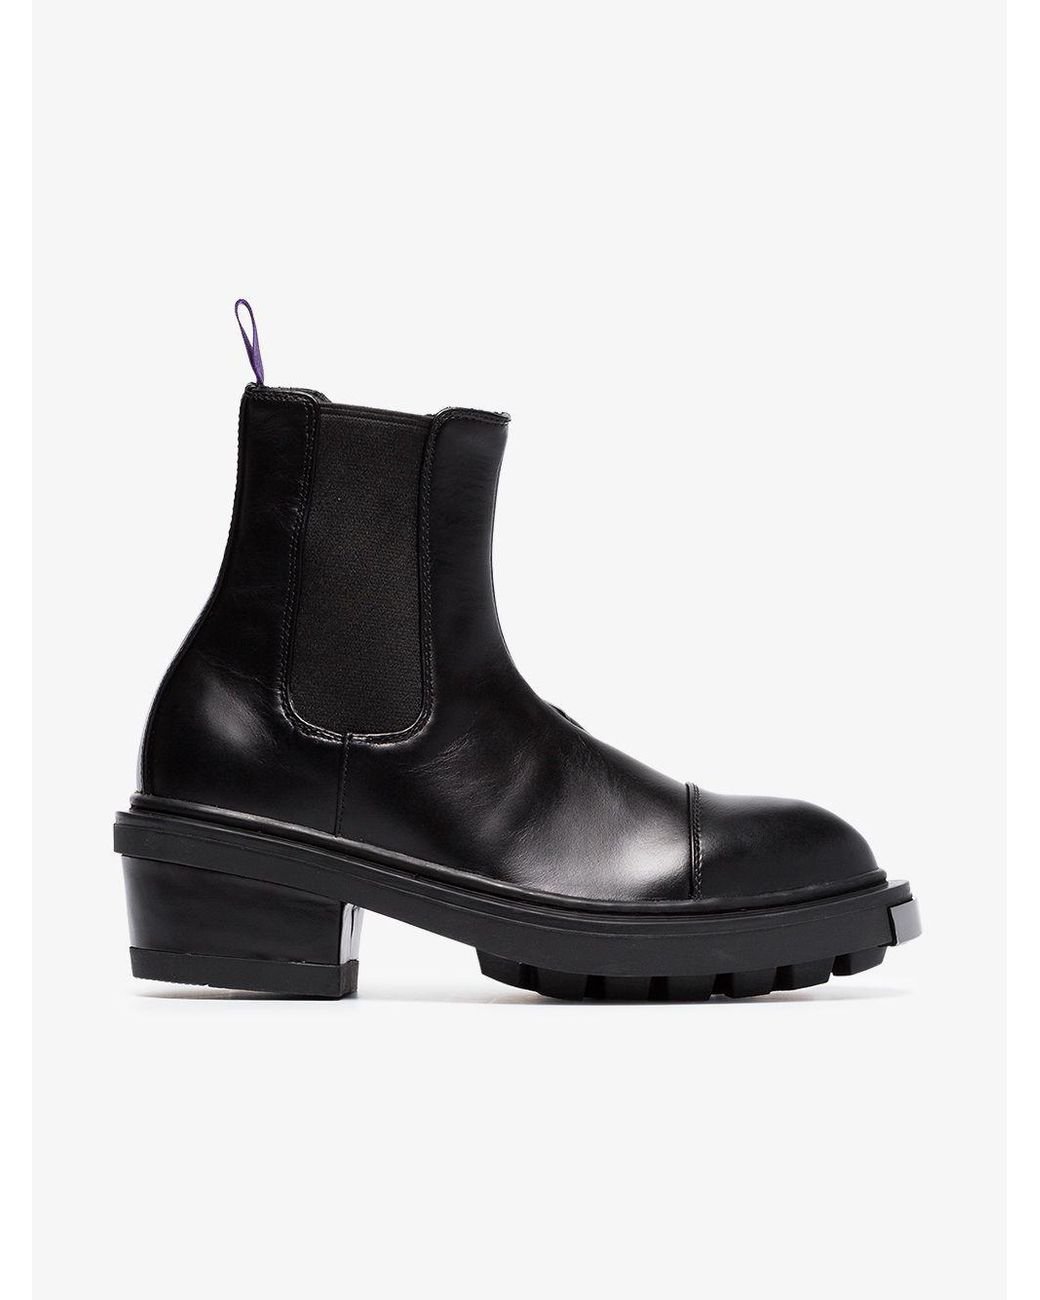 Eytys Nikita Ankle Boots in Black | Lyst